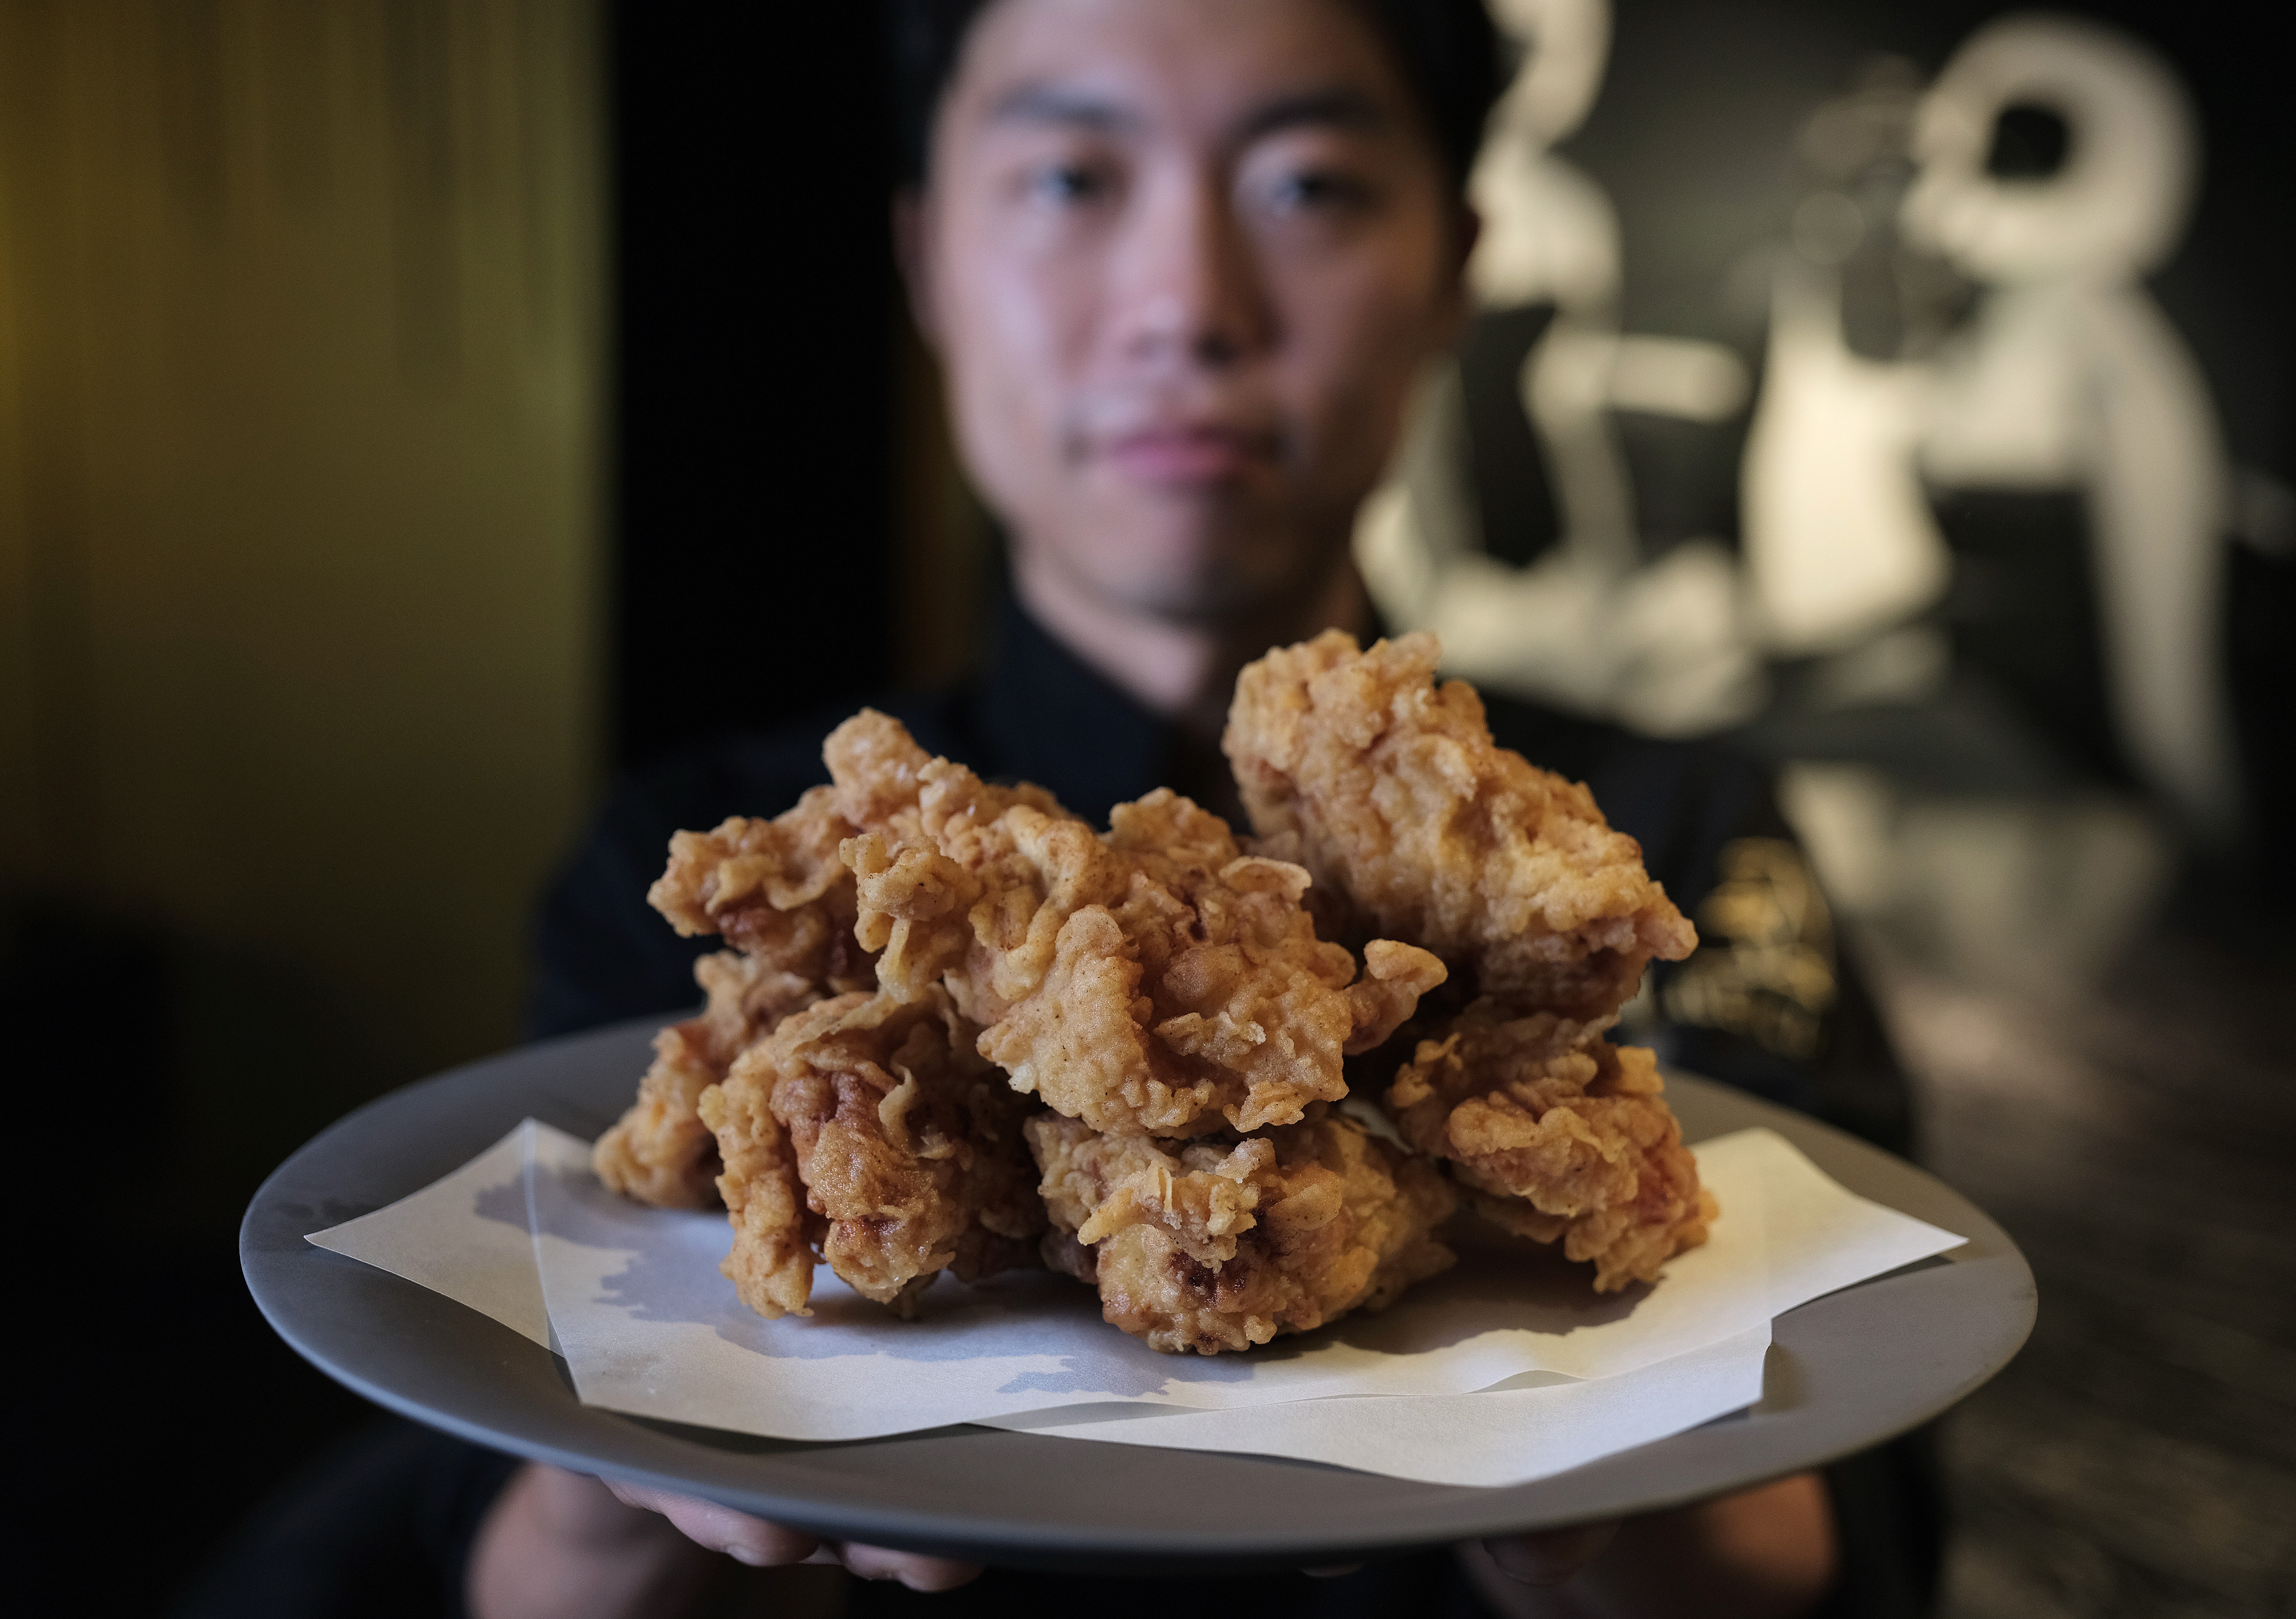 Chef Yong Soo-do with his Korean fried chicken, whose preparation includes marinating it overnight in brine, then putting it in a tempura batter with home-made chicken powder. Photo: Tory Ho